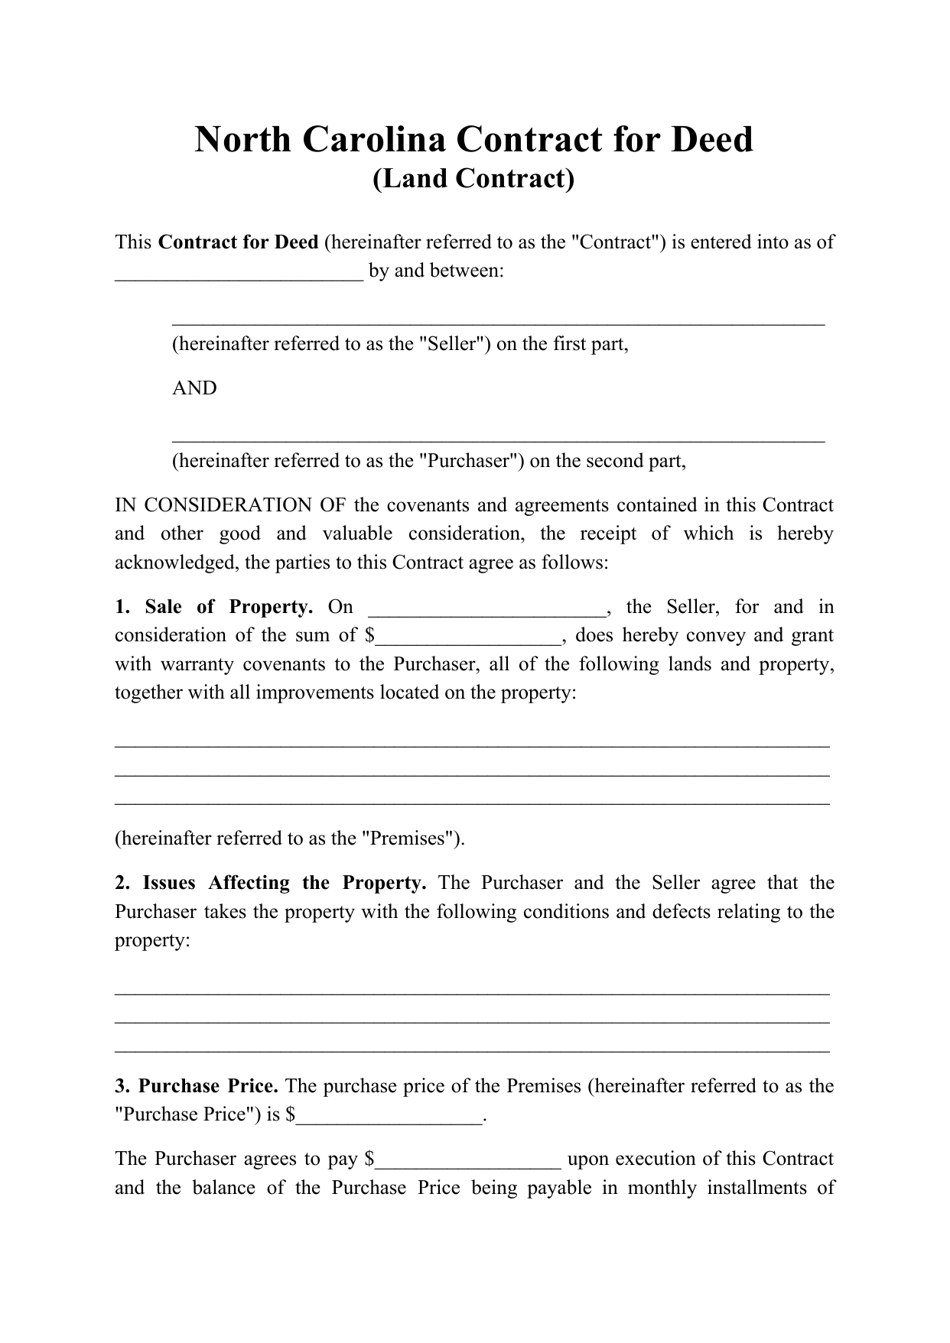 north-carolina-contract-for-deed-land-contract-fill-out-sign-online-and-download-pdf